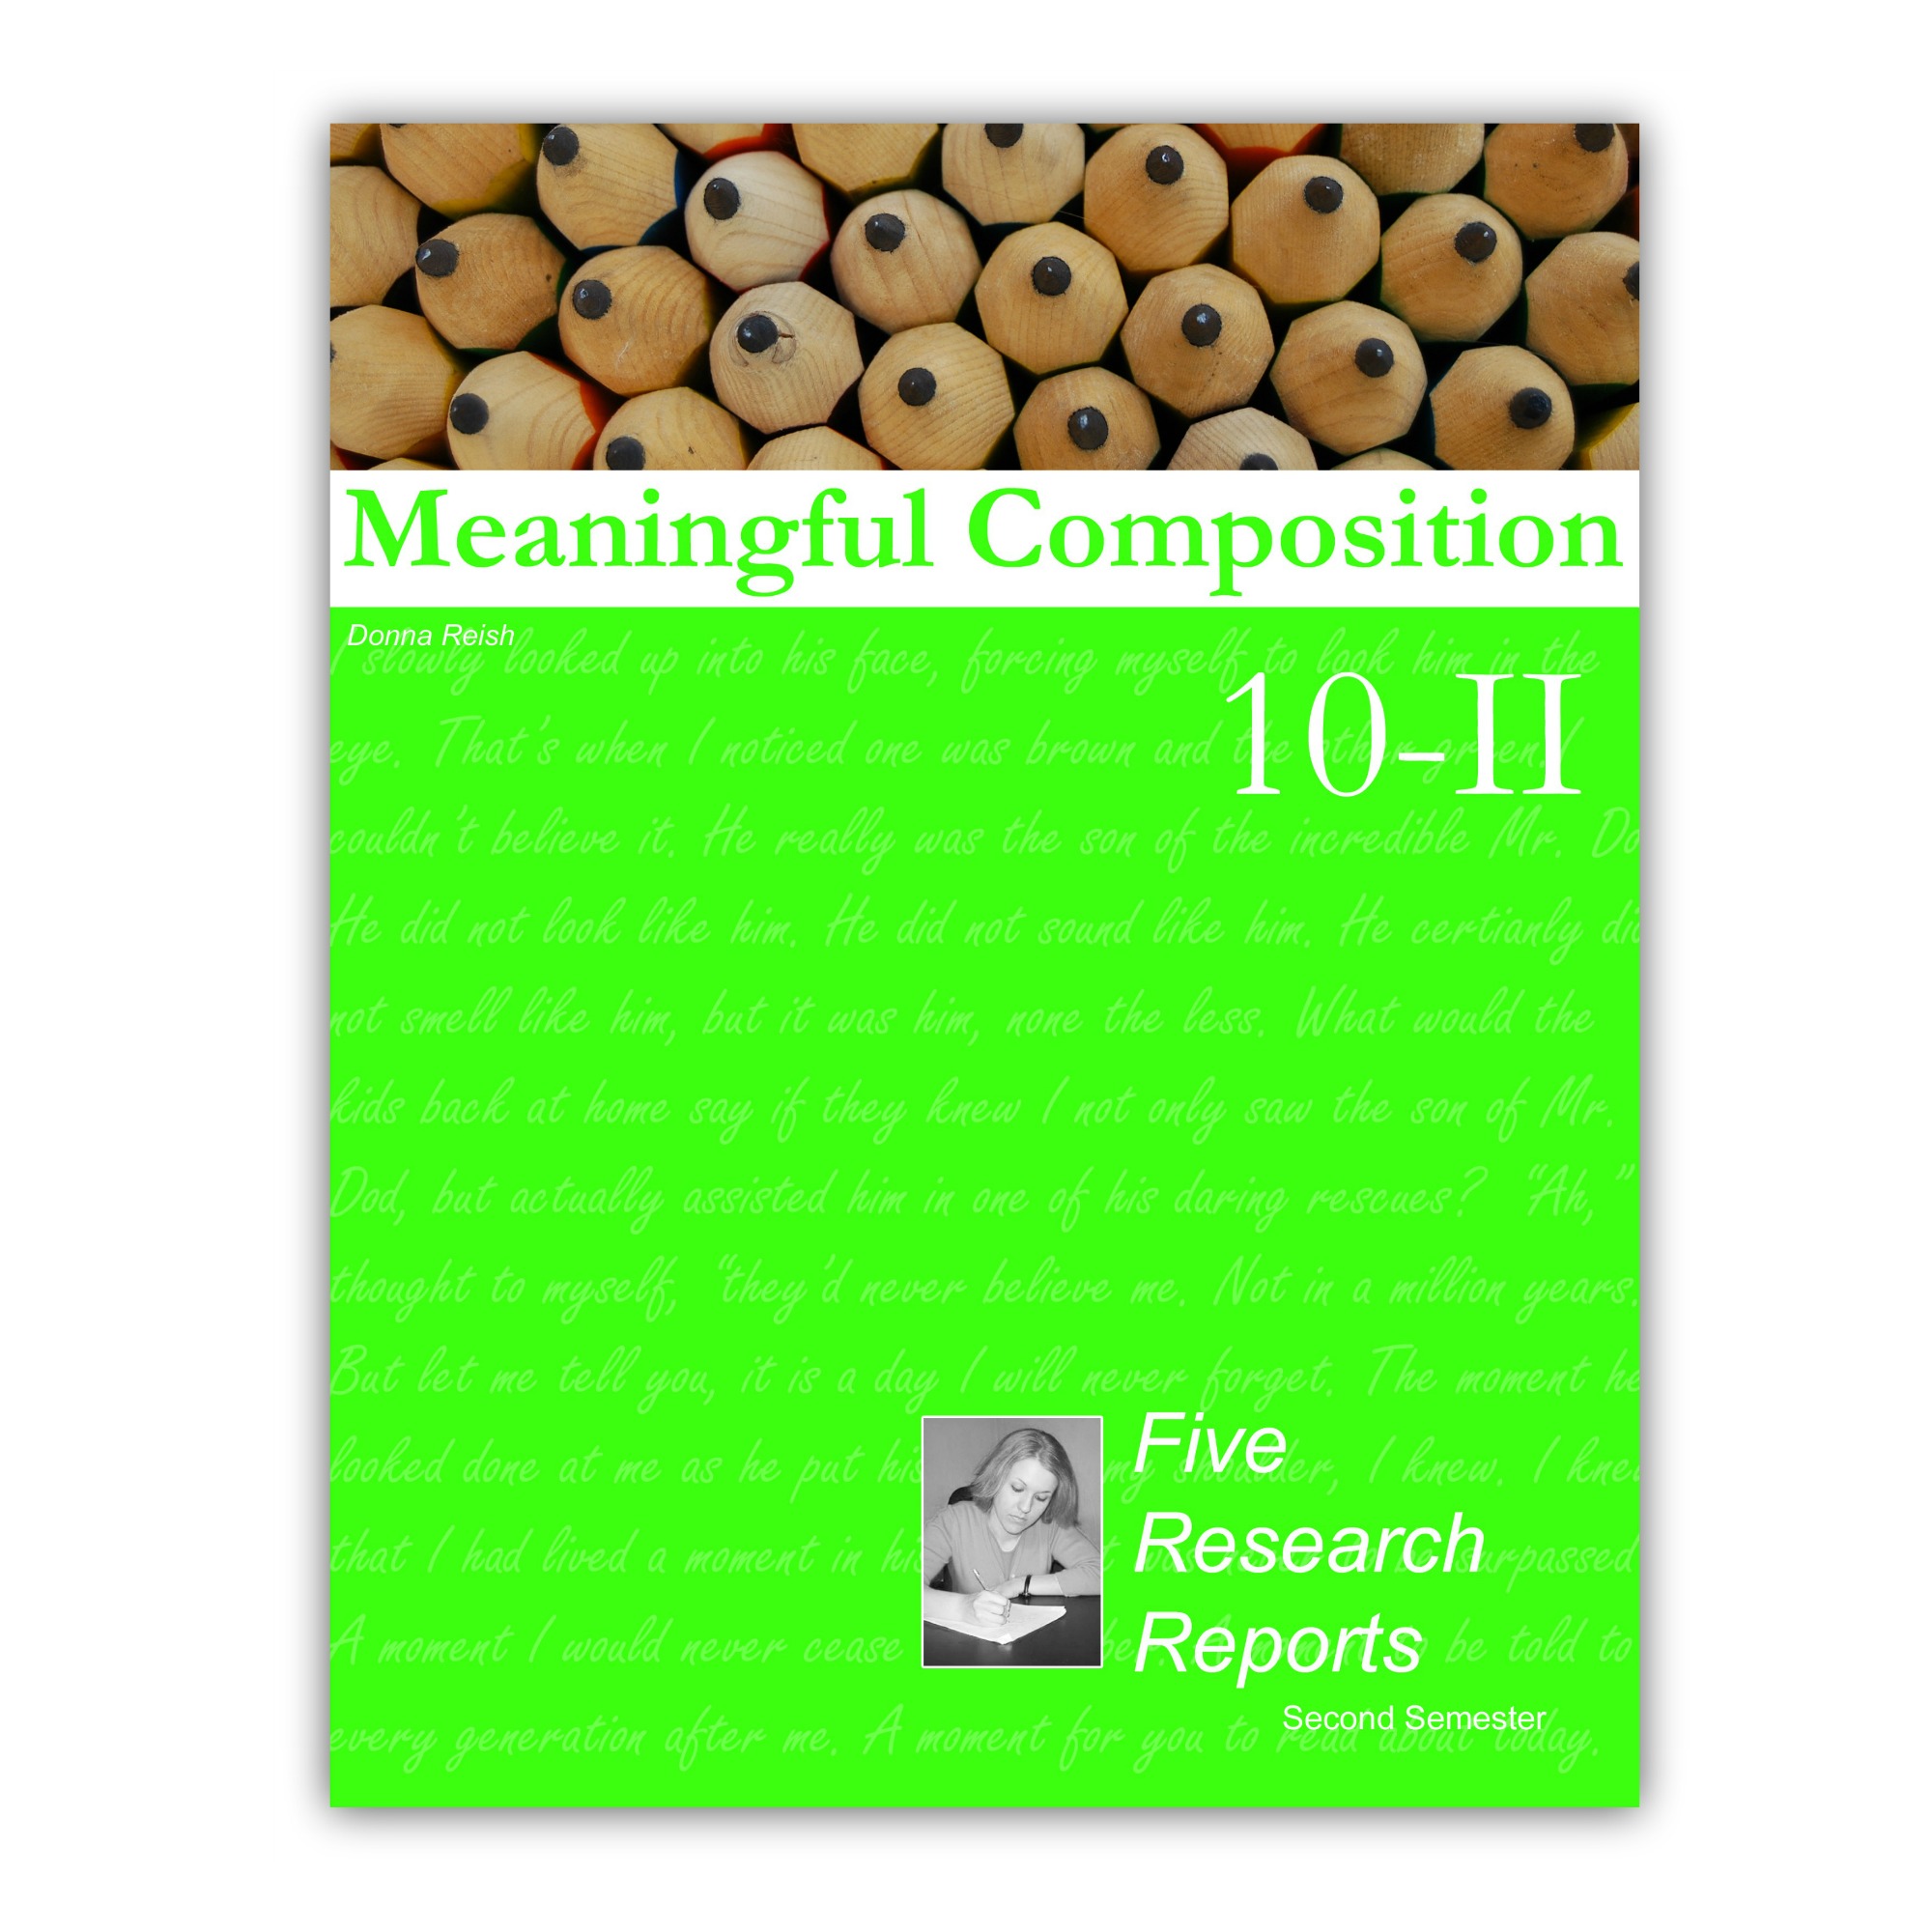 Meaningful Composition 10-II: Four Research Reports